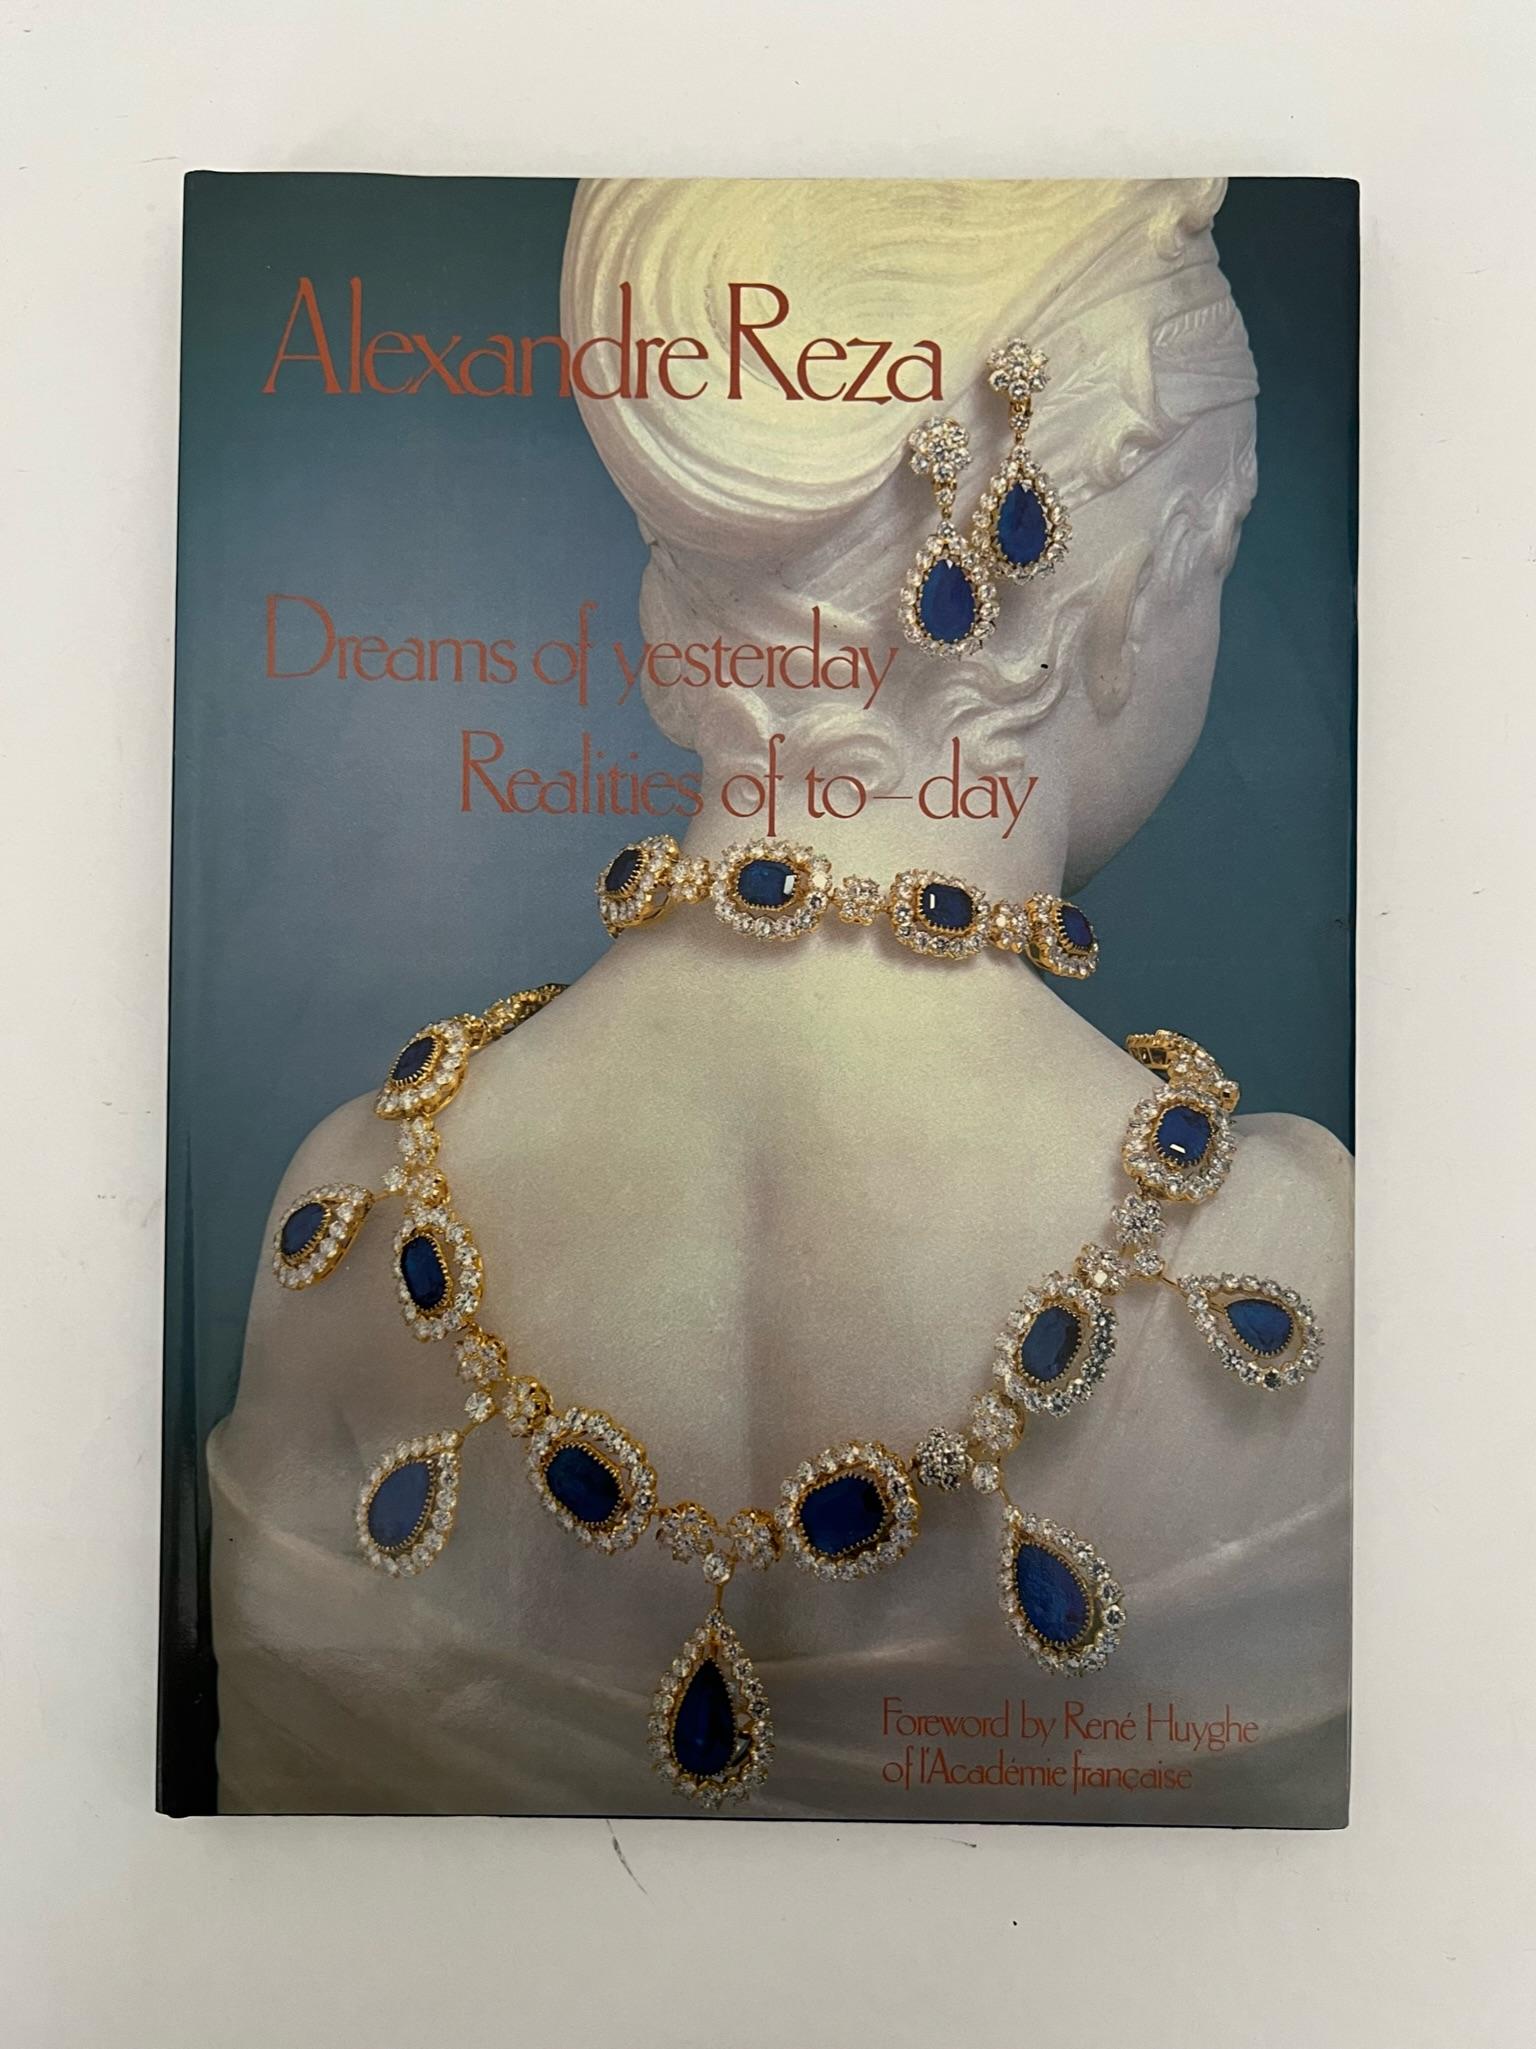 Alexandre Reza: Dreams of Yesterday Realities of To-day is a book about the life and work of Alexandre Reza, a Paris-based jeweler known for his diverse and rare collection of precious gemstones.
Large hardcover coffee table book written by Arlette